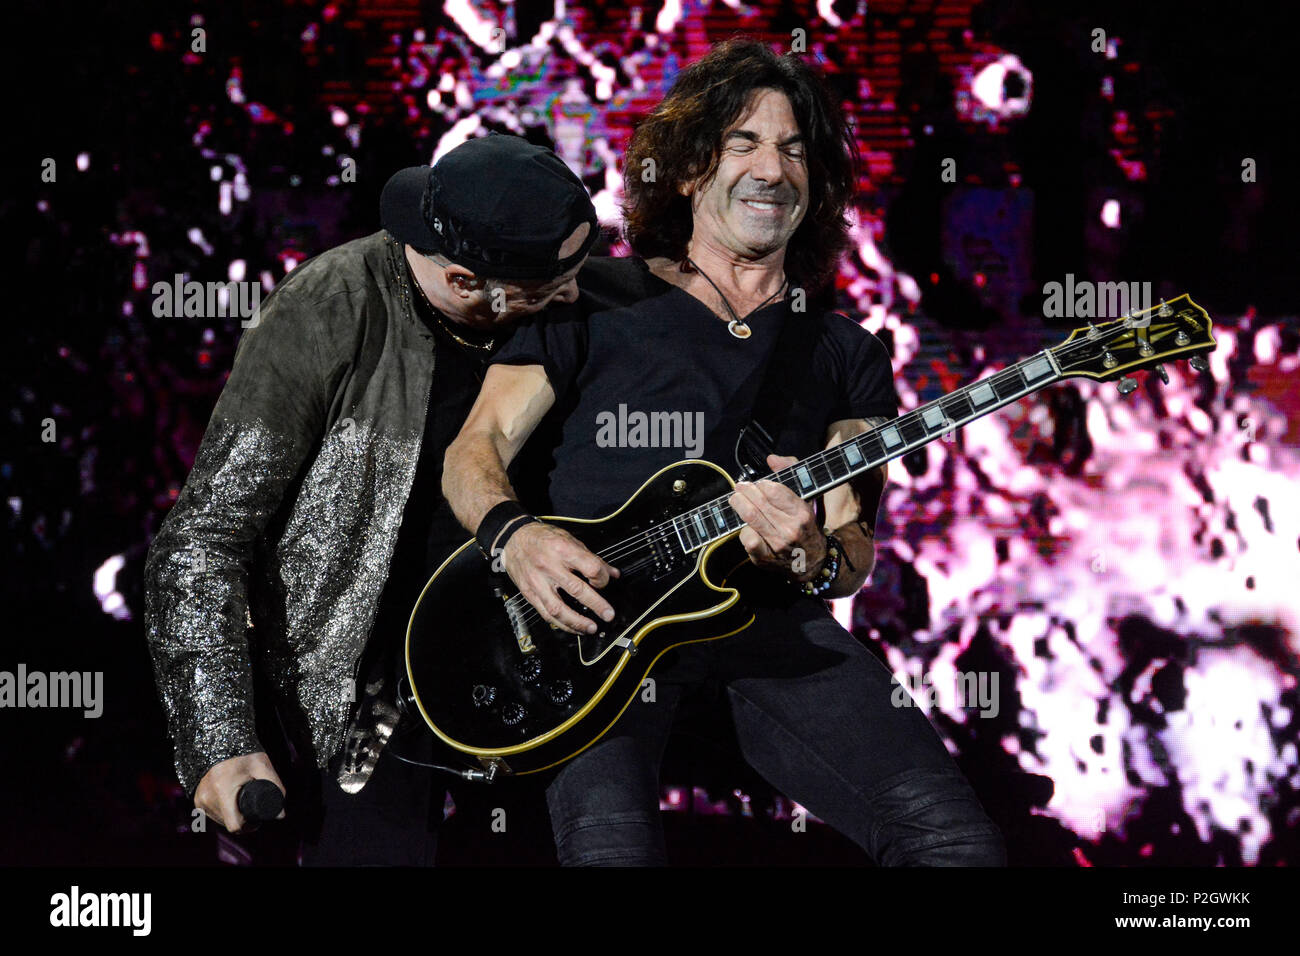 Italian singer and songwriter Vasco Rossi performing live on stage with his  guitarist Stef Burns during his tour 'Vasco Non Stop Live 2018' Stock Photo  - Alamy